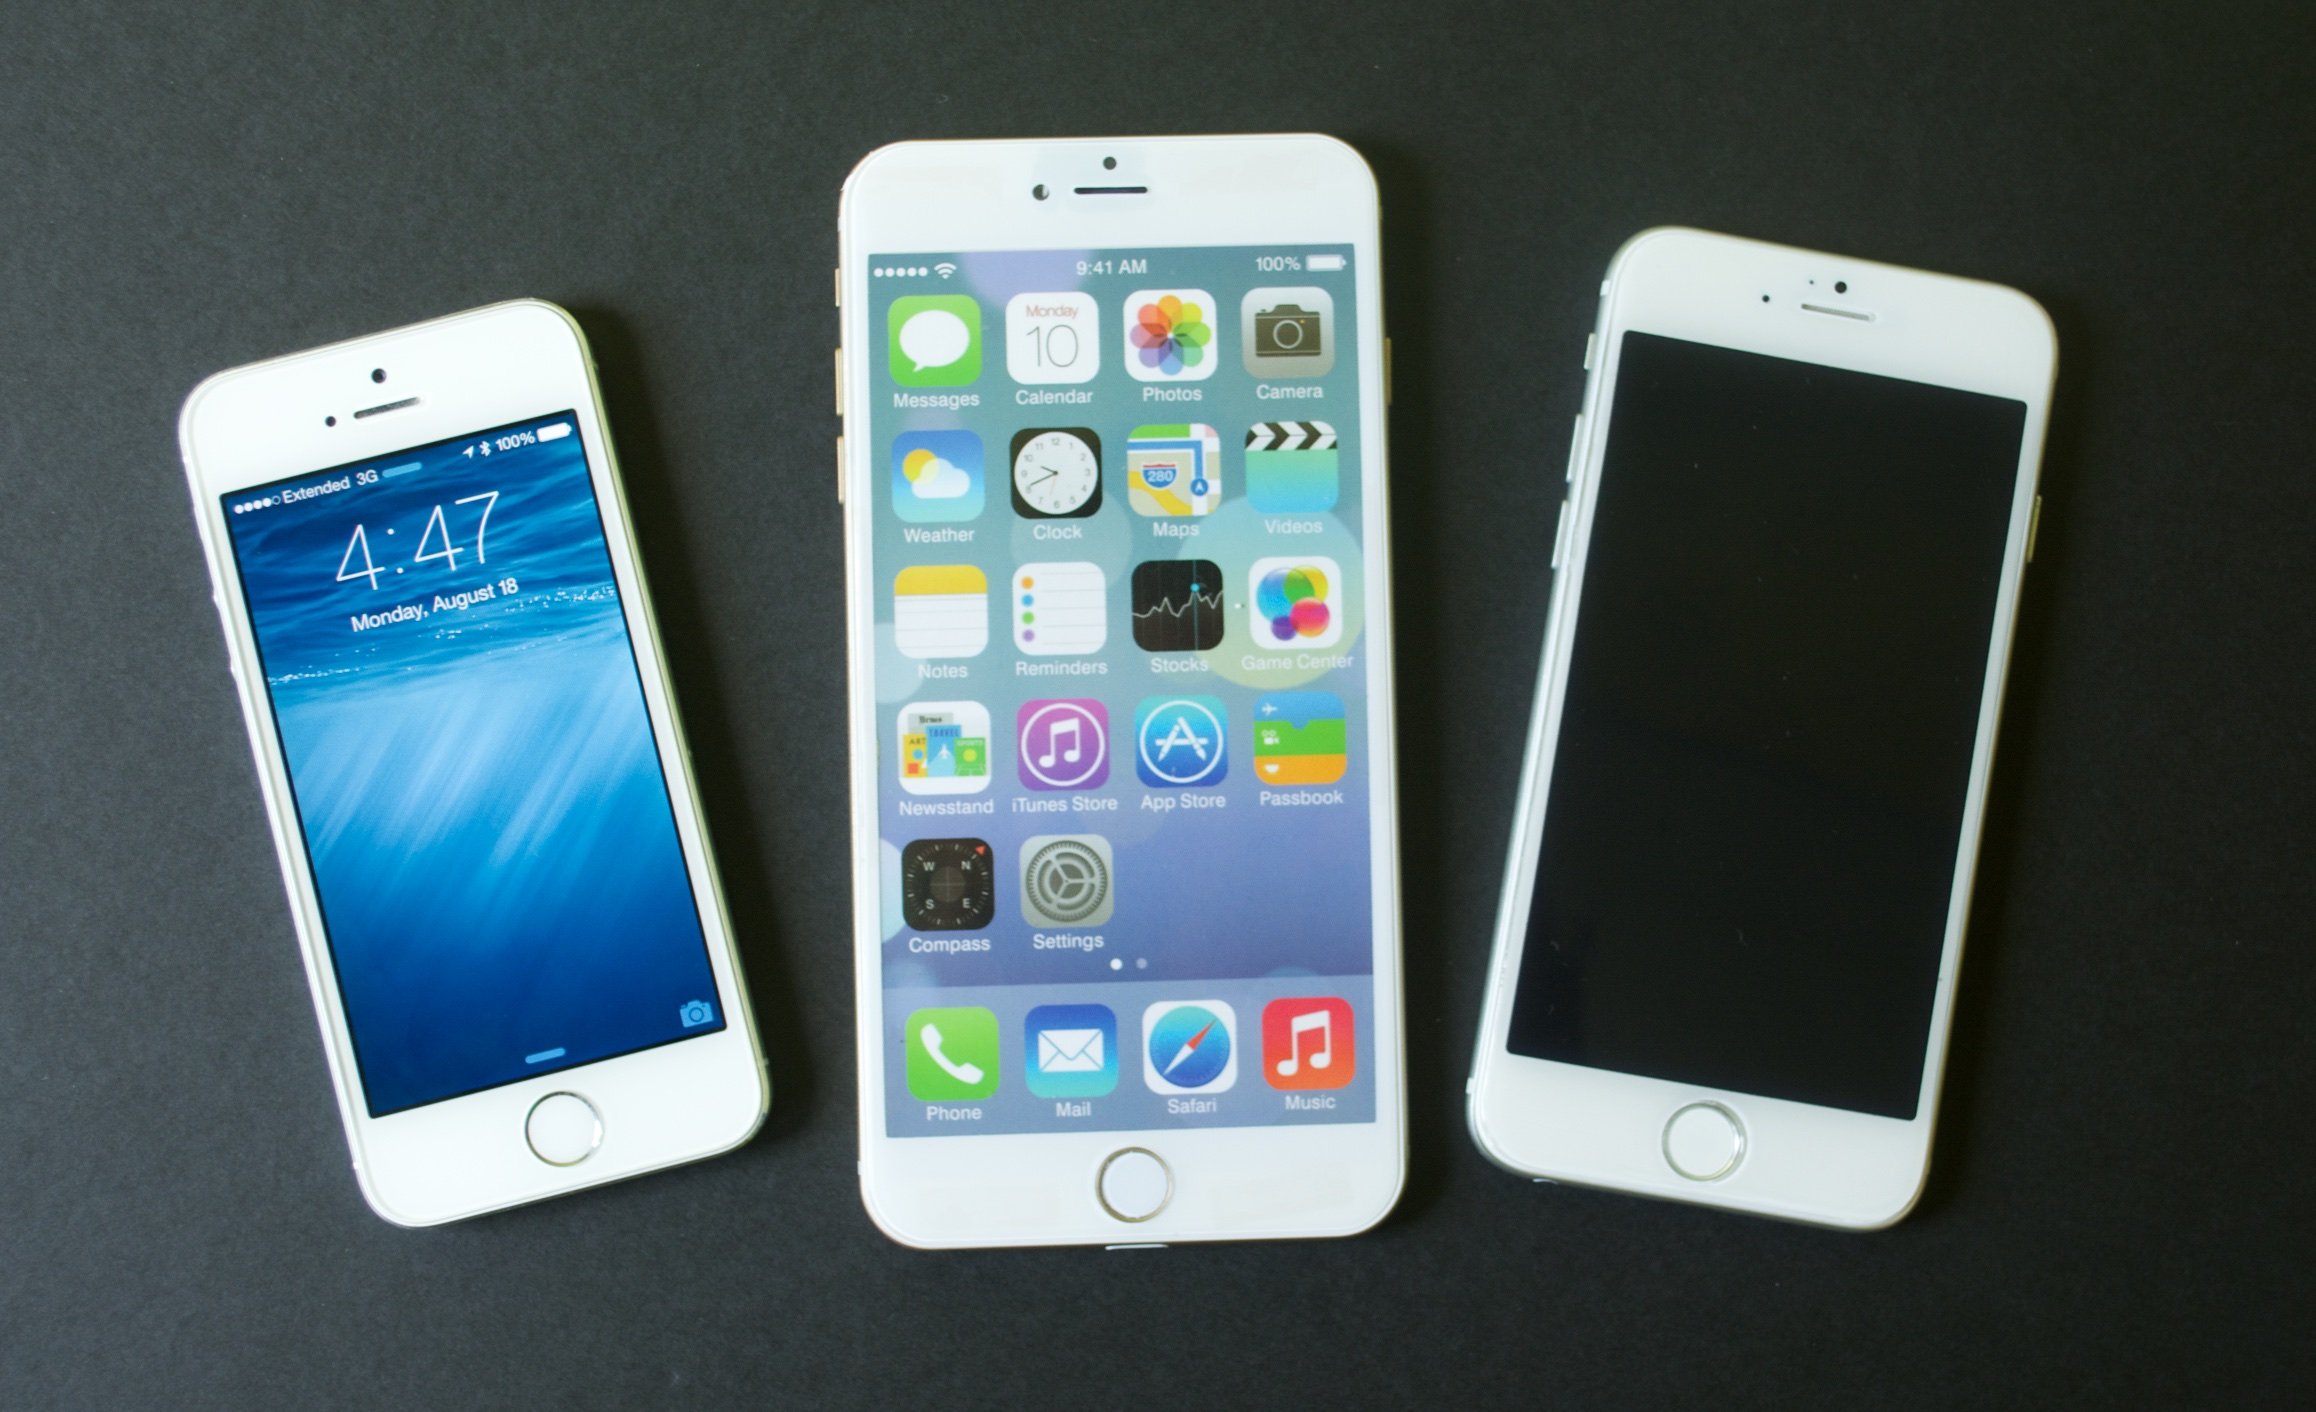 iPhone 6 vs iPhone 5s: 5 Things to Know About the Big iPhone